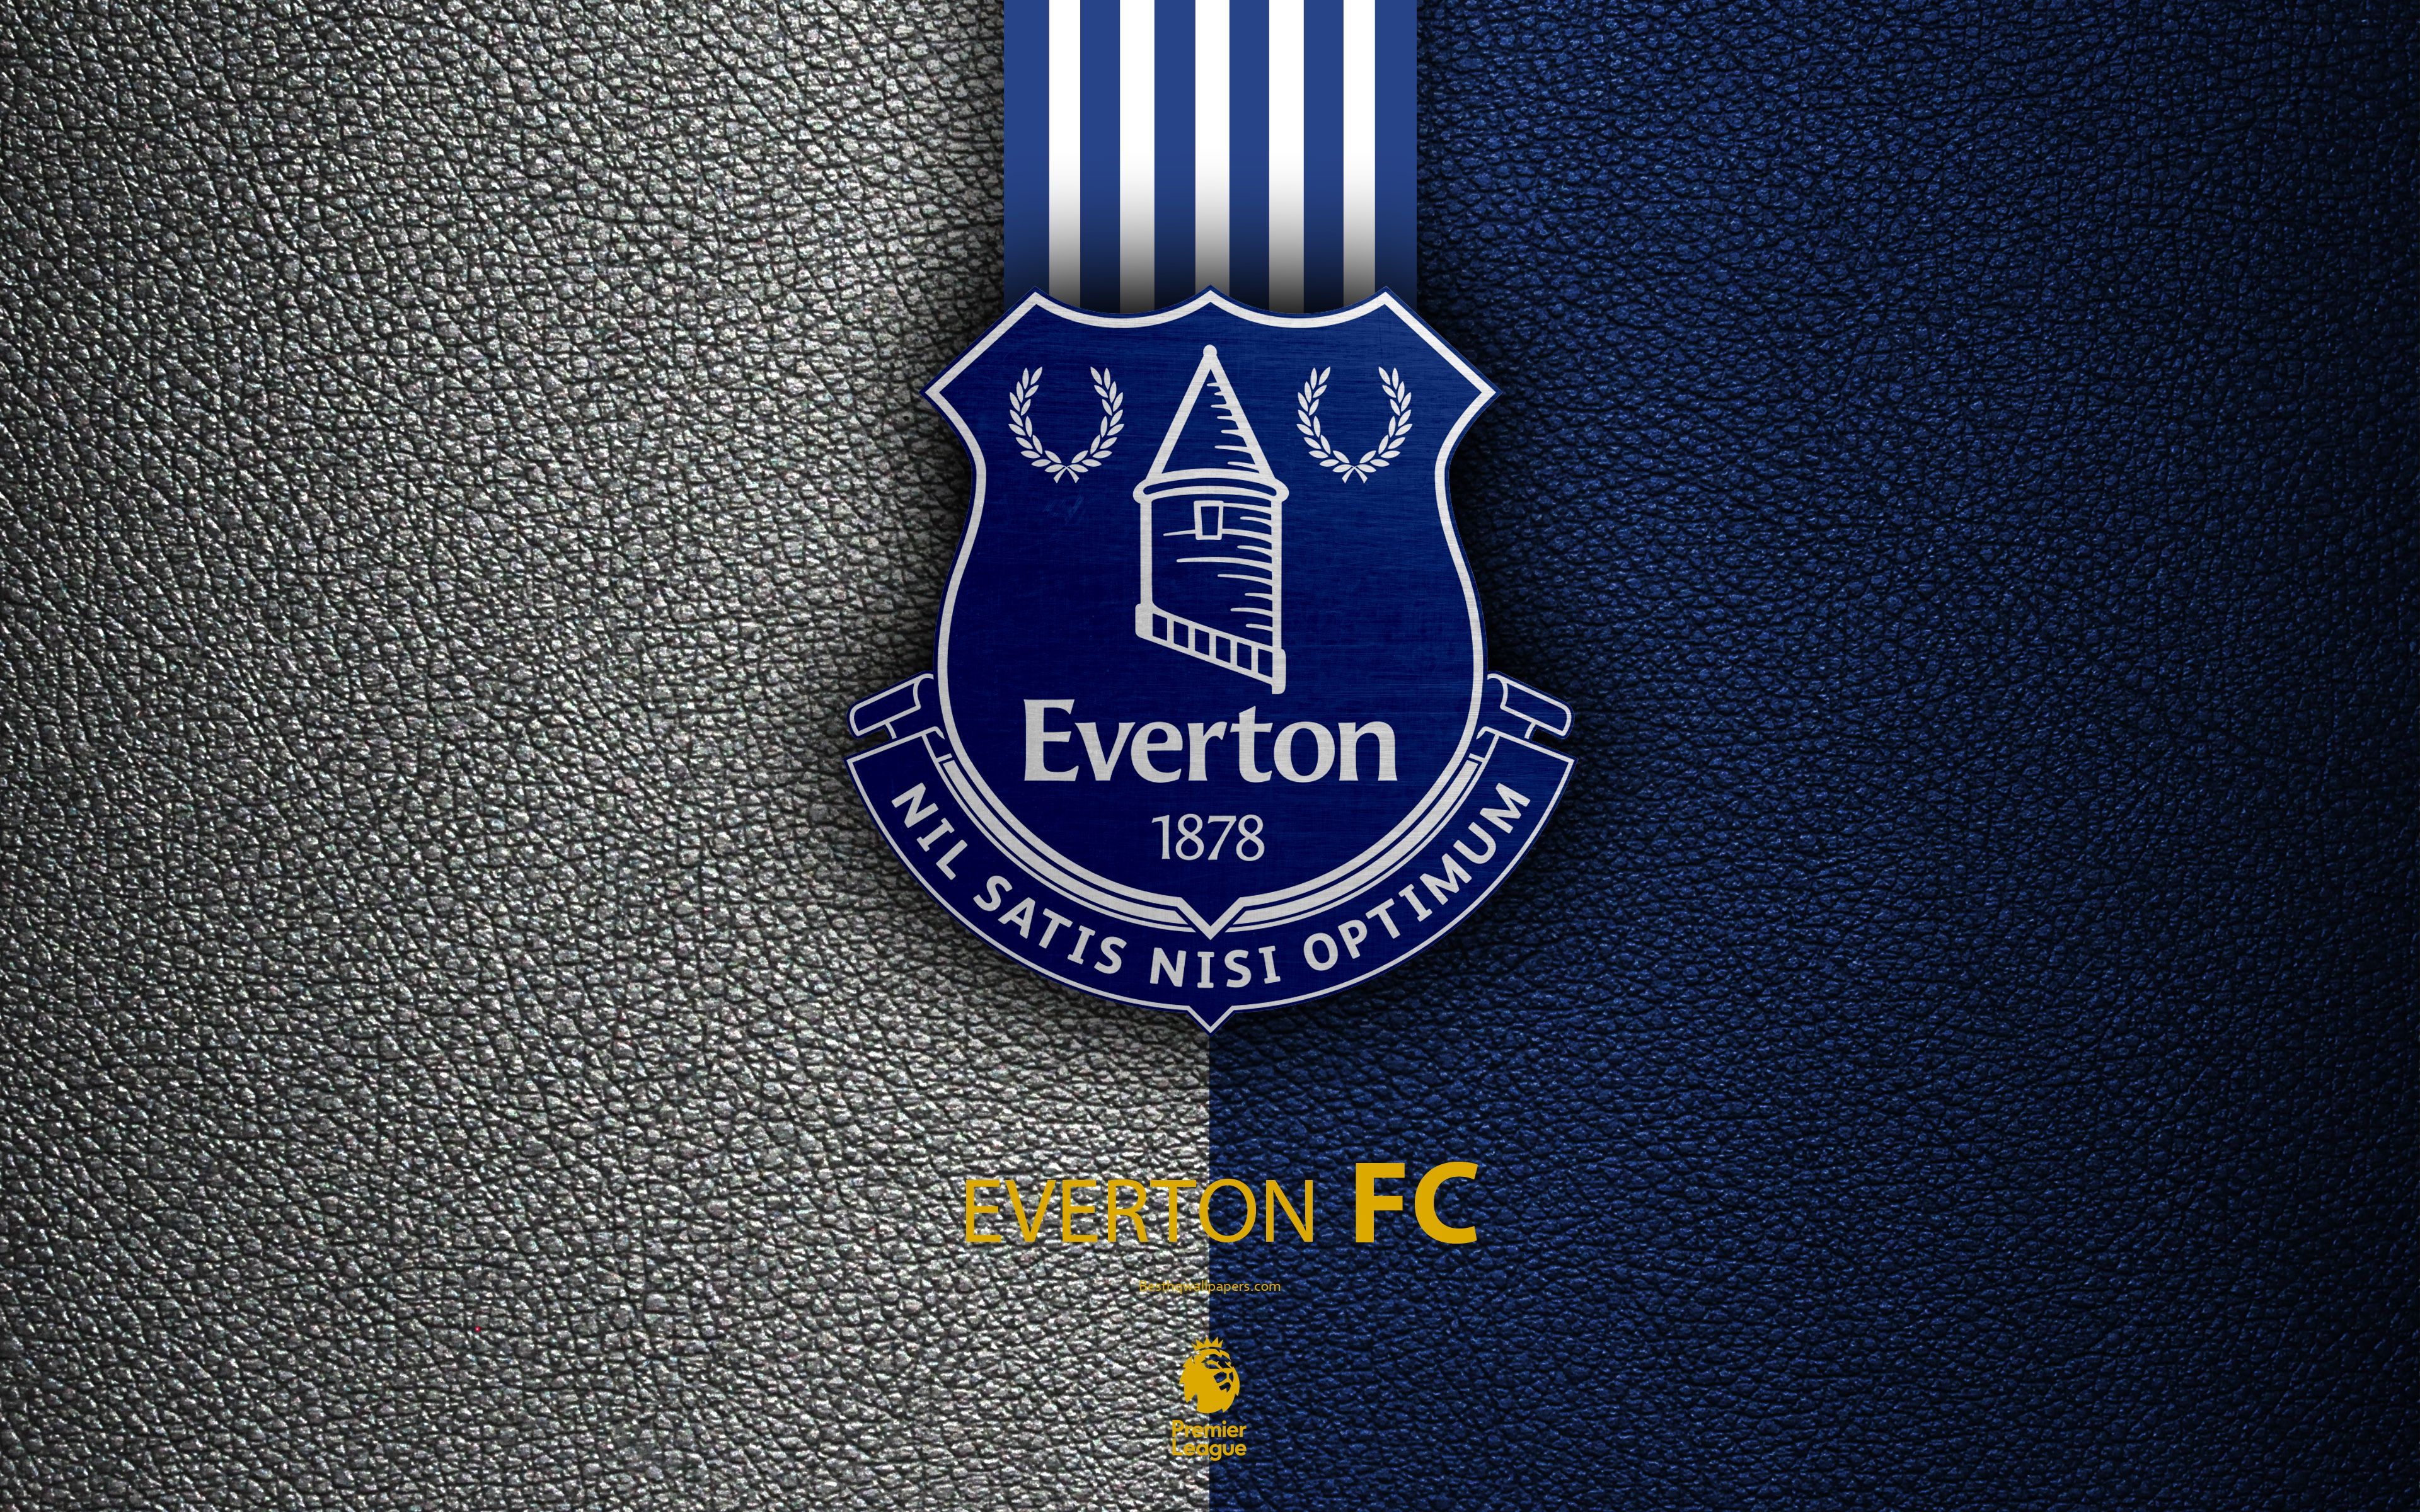 Download wallpaper Everton FC, 4K, English football club, leather texture, Premier League, Everton logo, emblem, Liverpool, England, United Kingdom, football for desktop with resolution 3840x2400. High Quality HD picture wallpaper